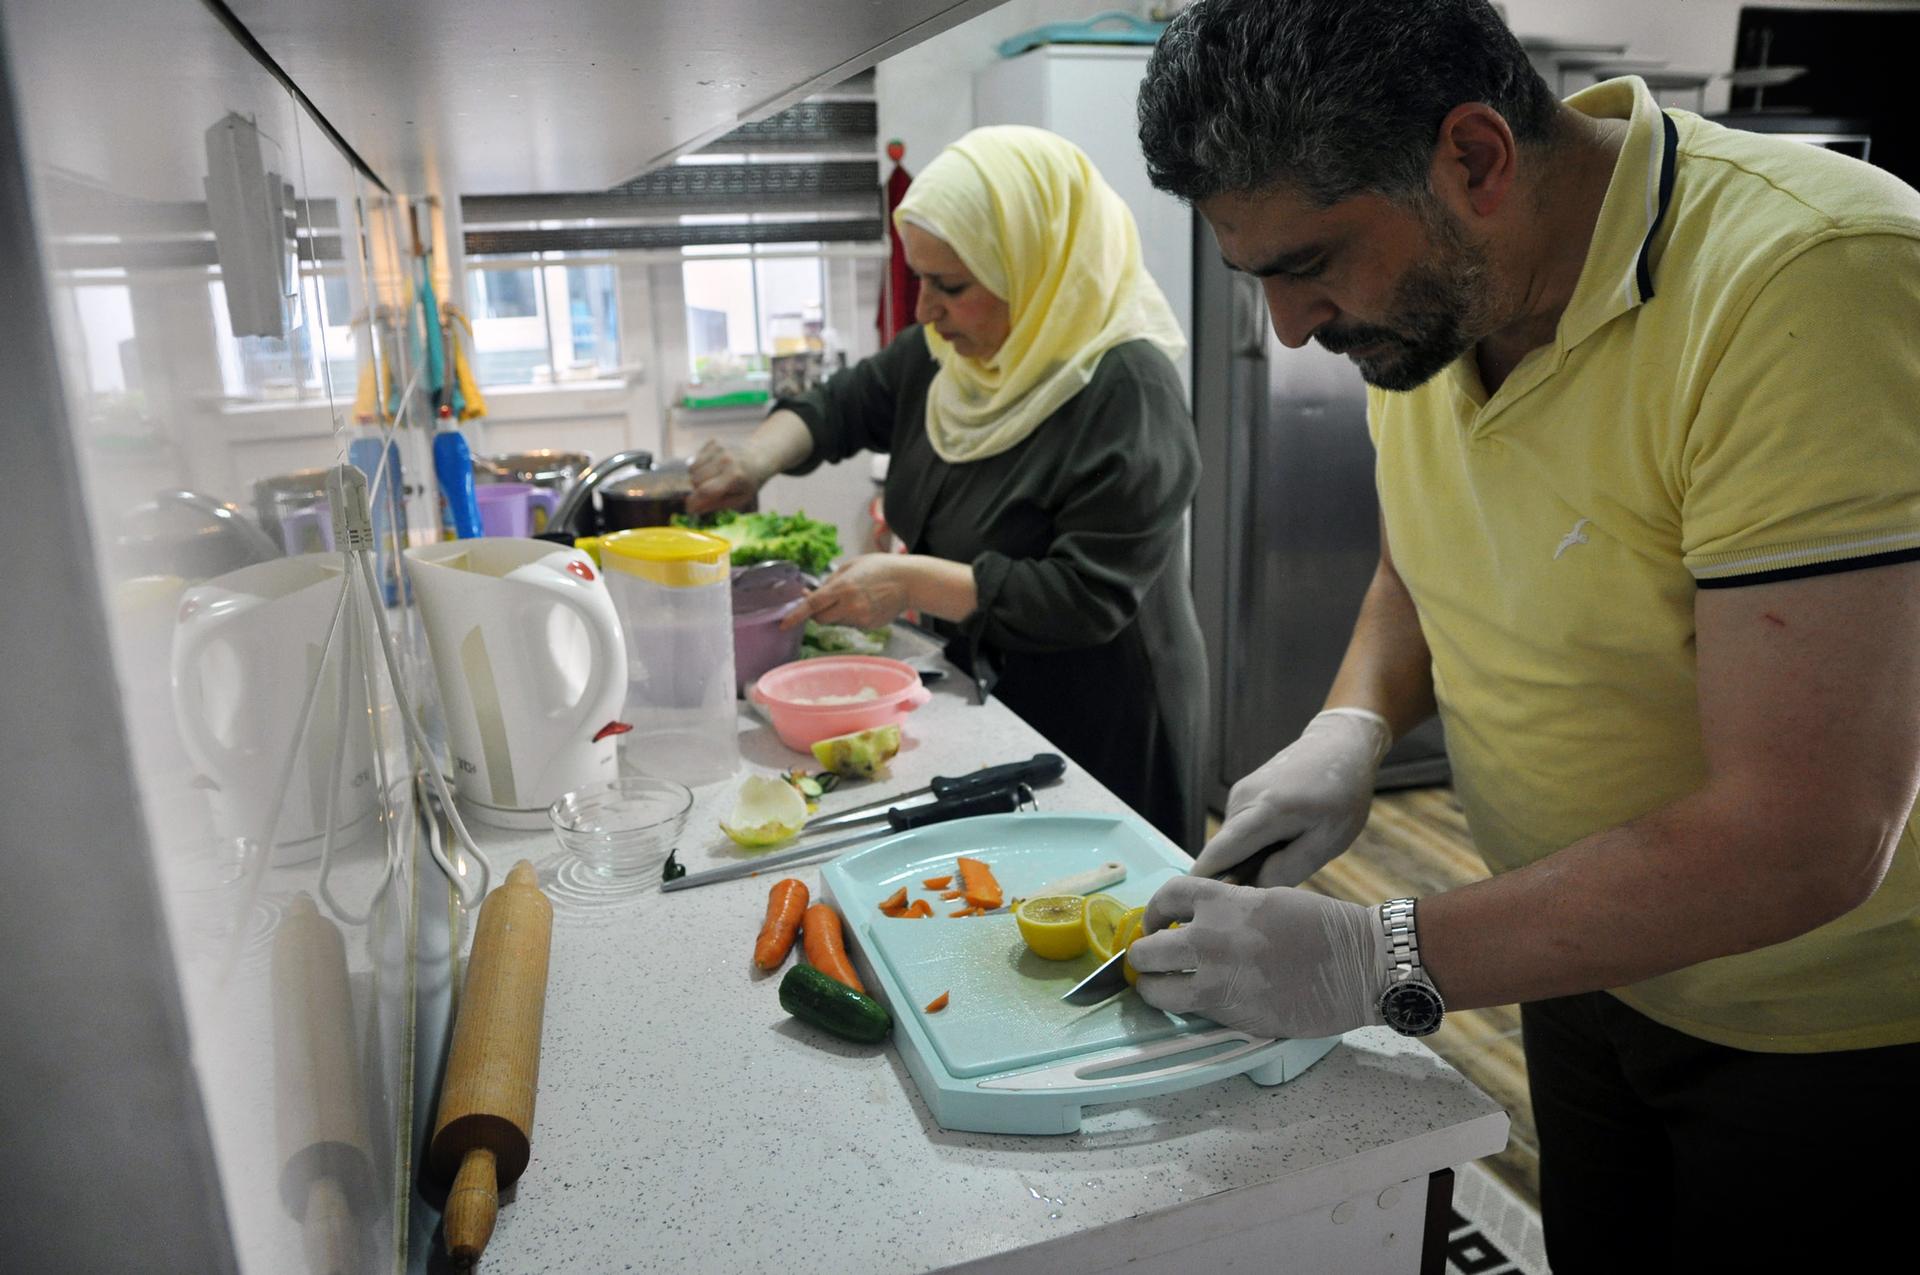 A man and woman prepare food together in a kitchen